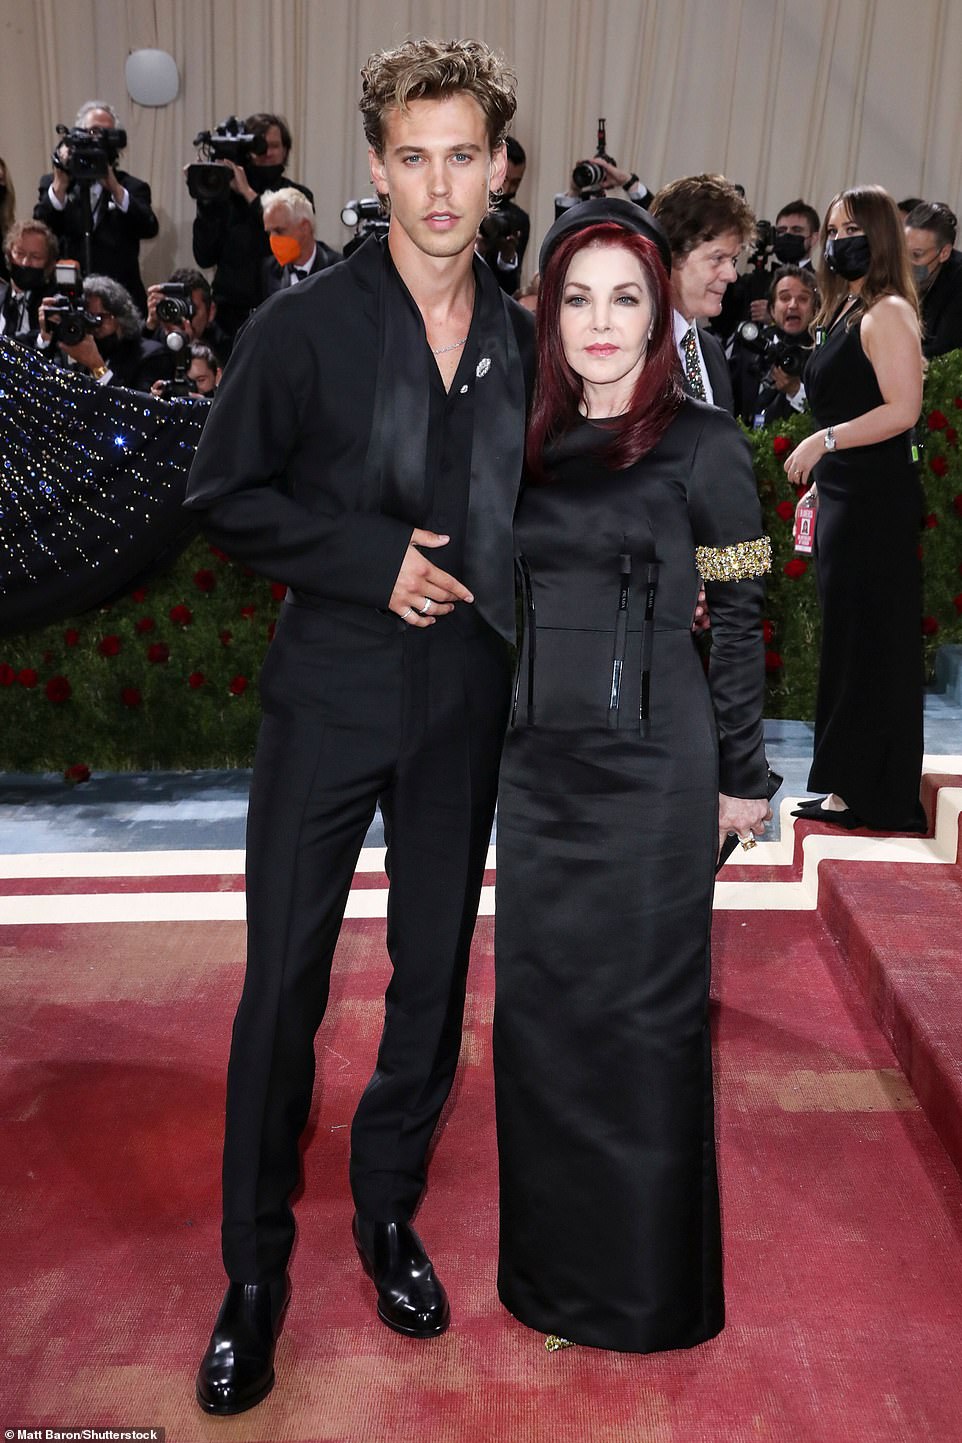 Still has it: Priscilla Presley, 76, surprised in a mostly black group as she walked the carpet at the Met Gala in Manhattan on Monday with Austin Butler, 30, who plays ex-husband Elvis Presley in a new biopic